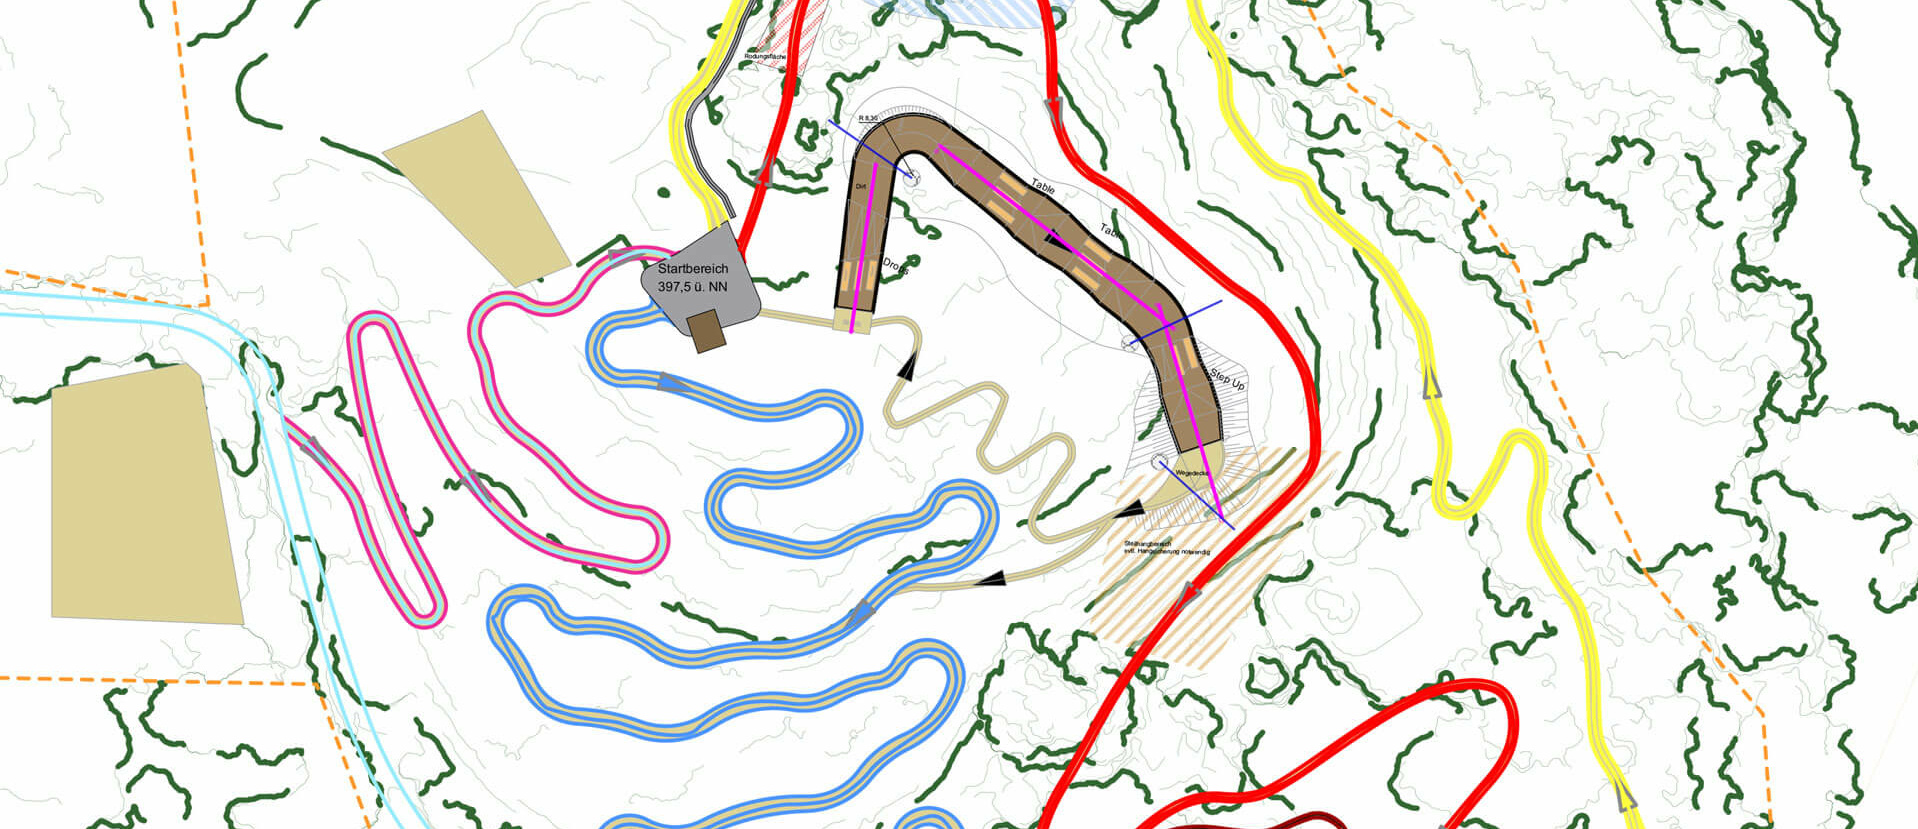 General map of the bike park Friedewald with different routes